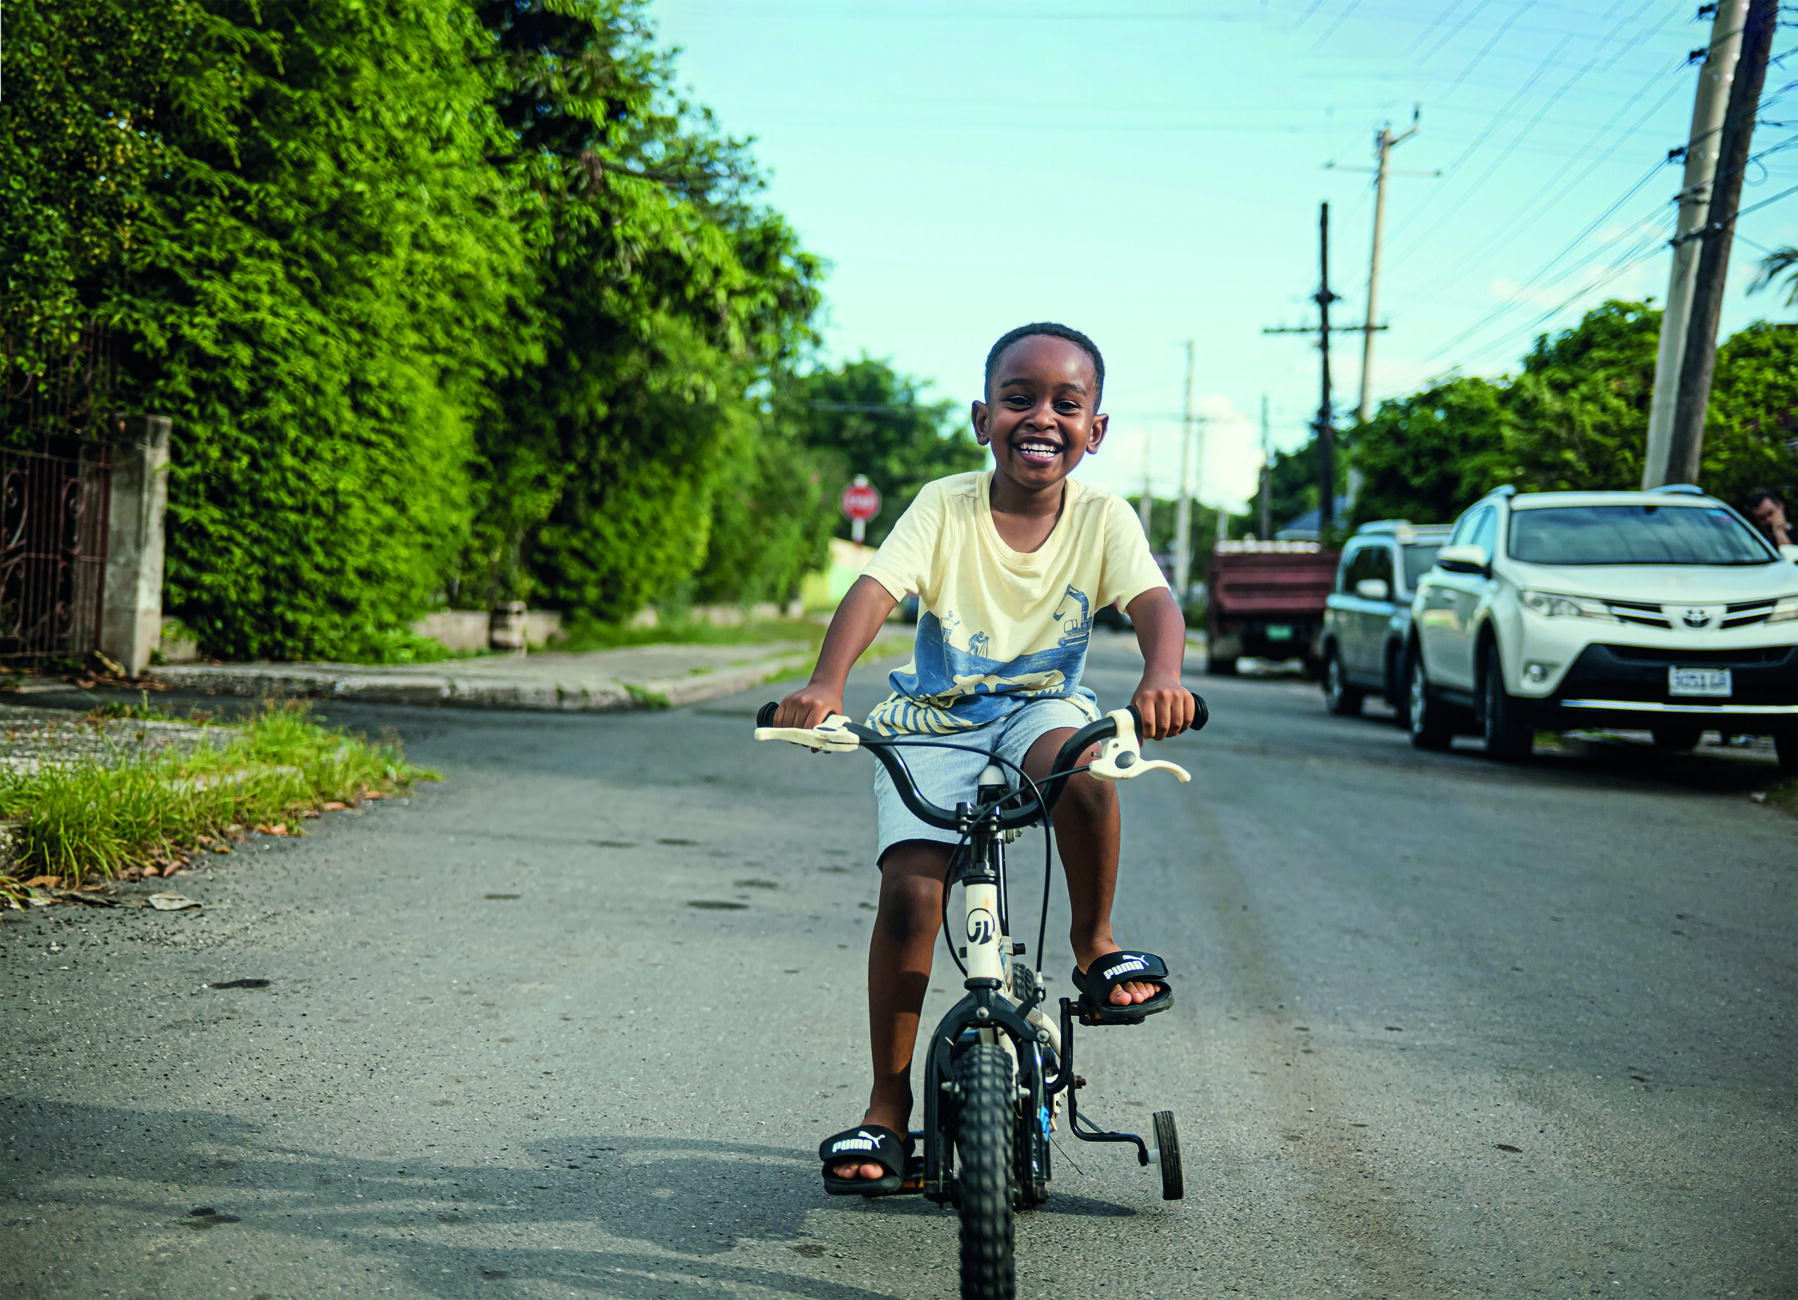 Image of Ari on a bicycle in Jamaica